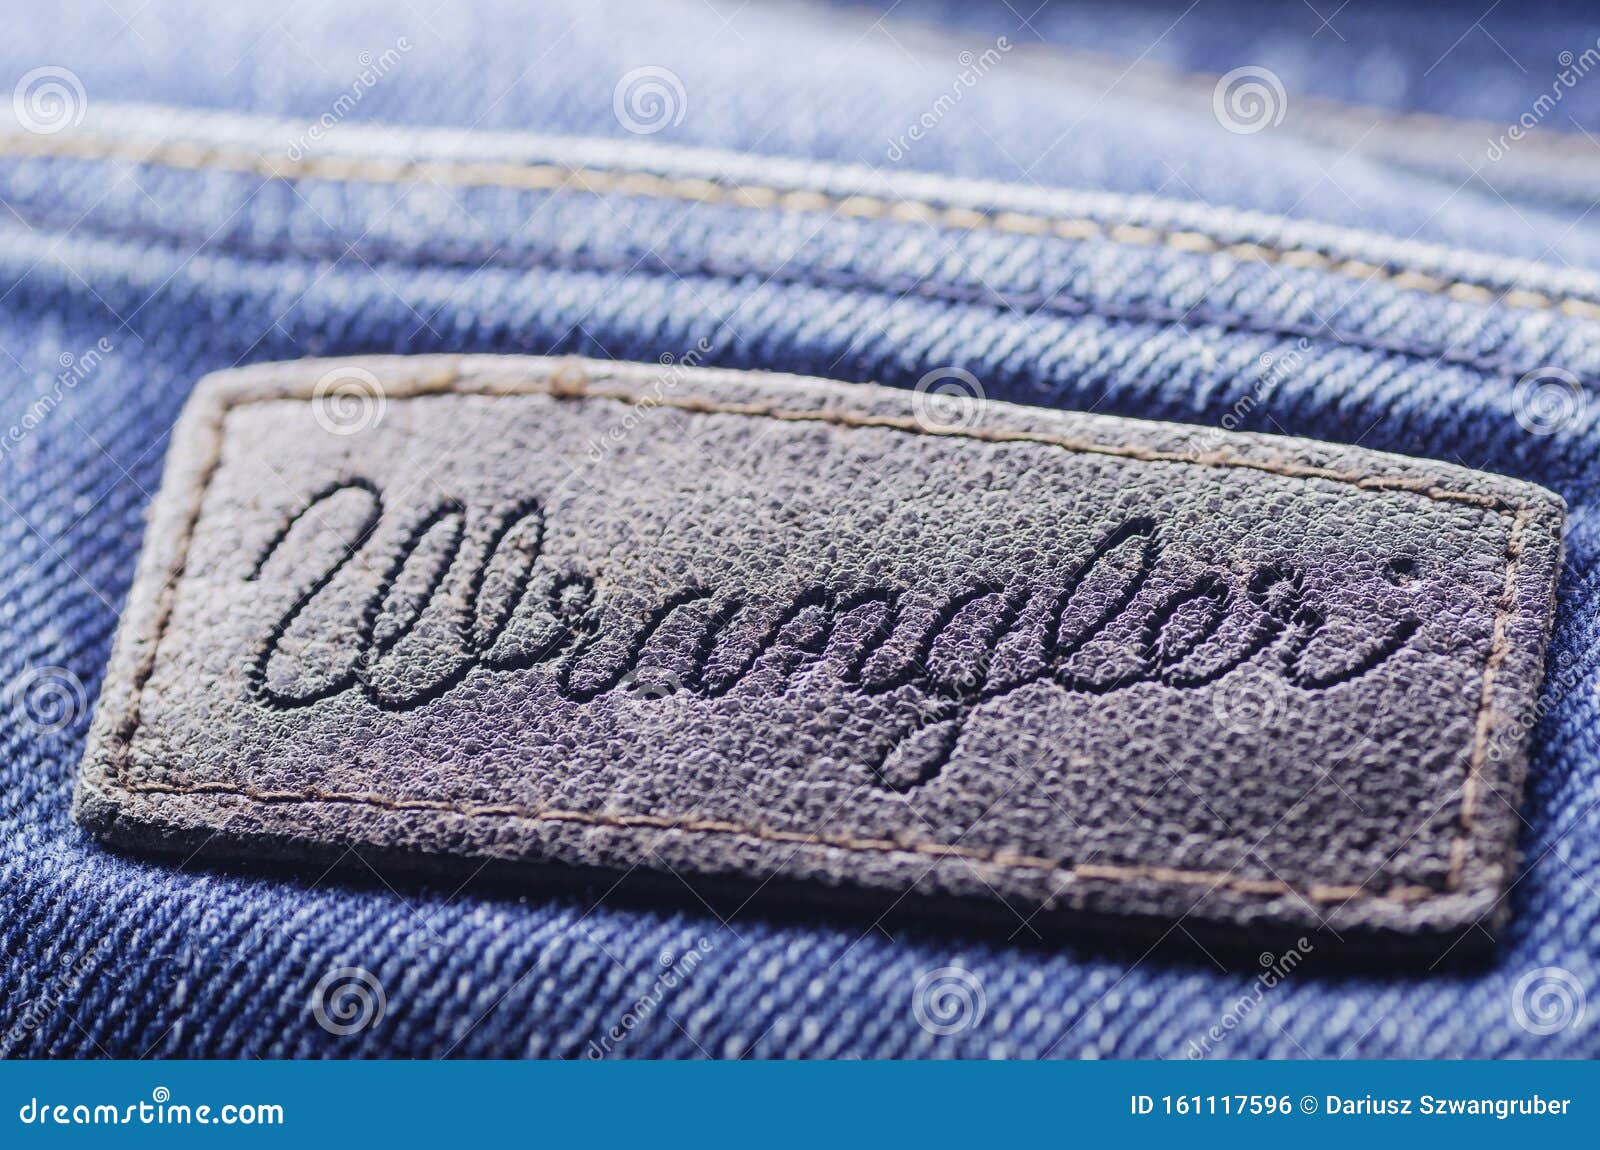 Closeup of Wrangler Label on Blue Jeans. Editorial Photo - Image of ...